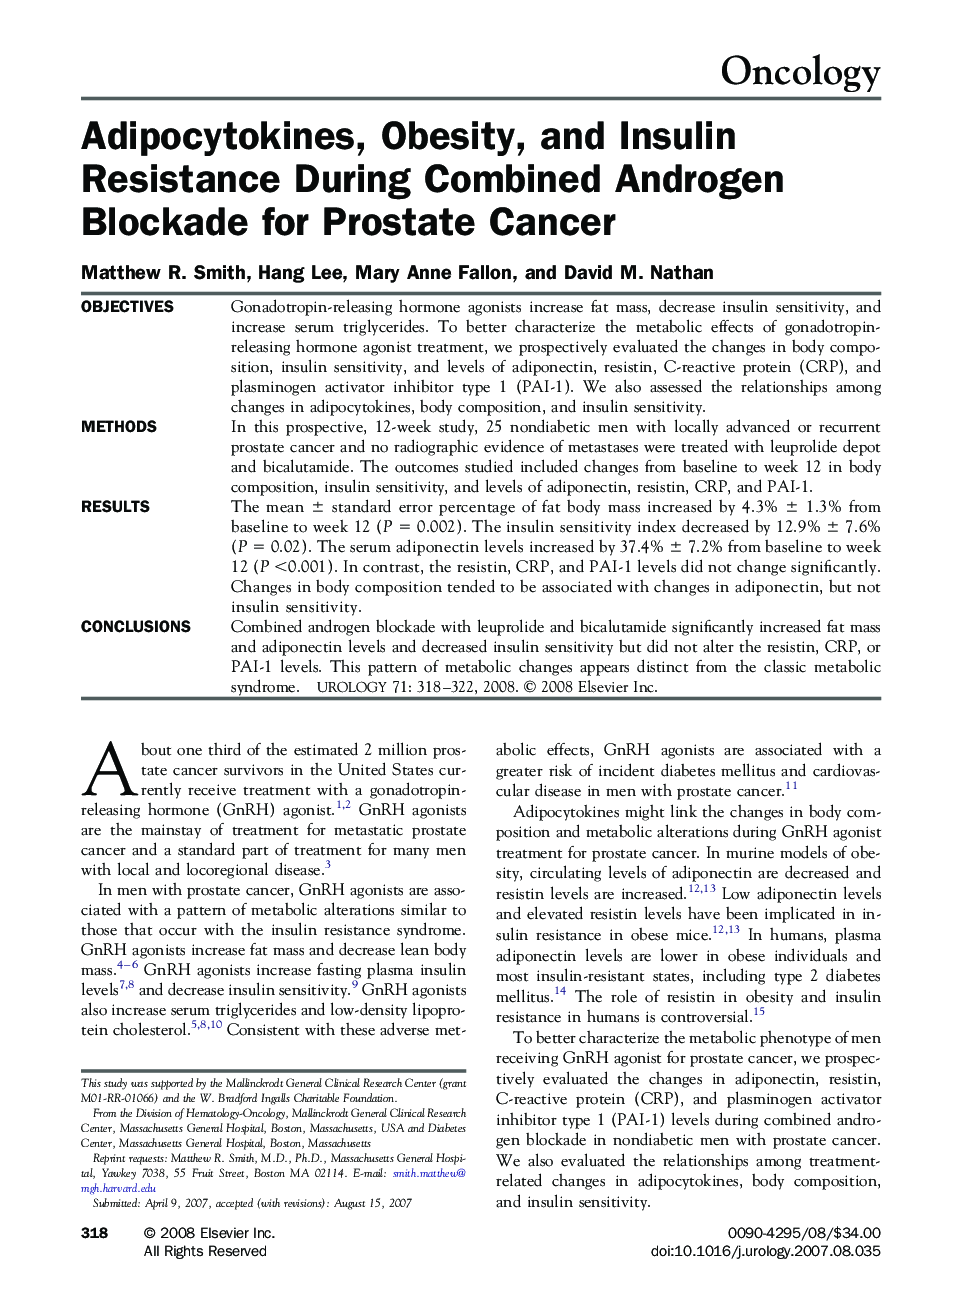 Adipocytokines, Obesity, and Insulin Resistance During Combined Androgen Blockade for Prostate Cancer 